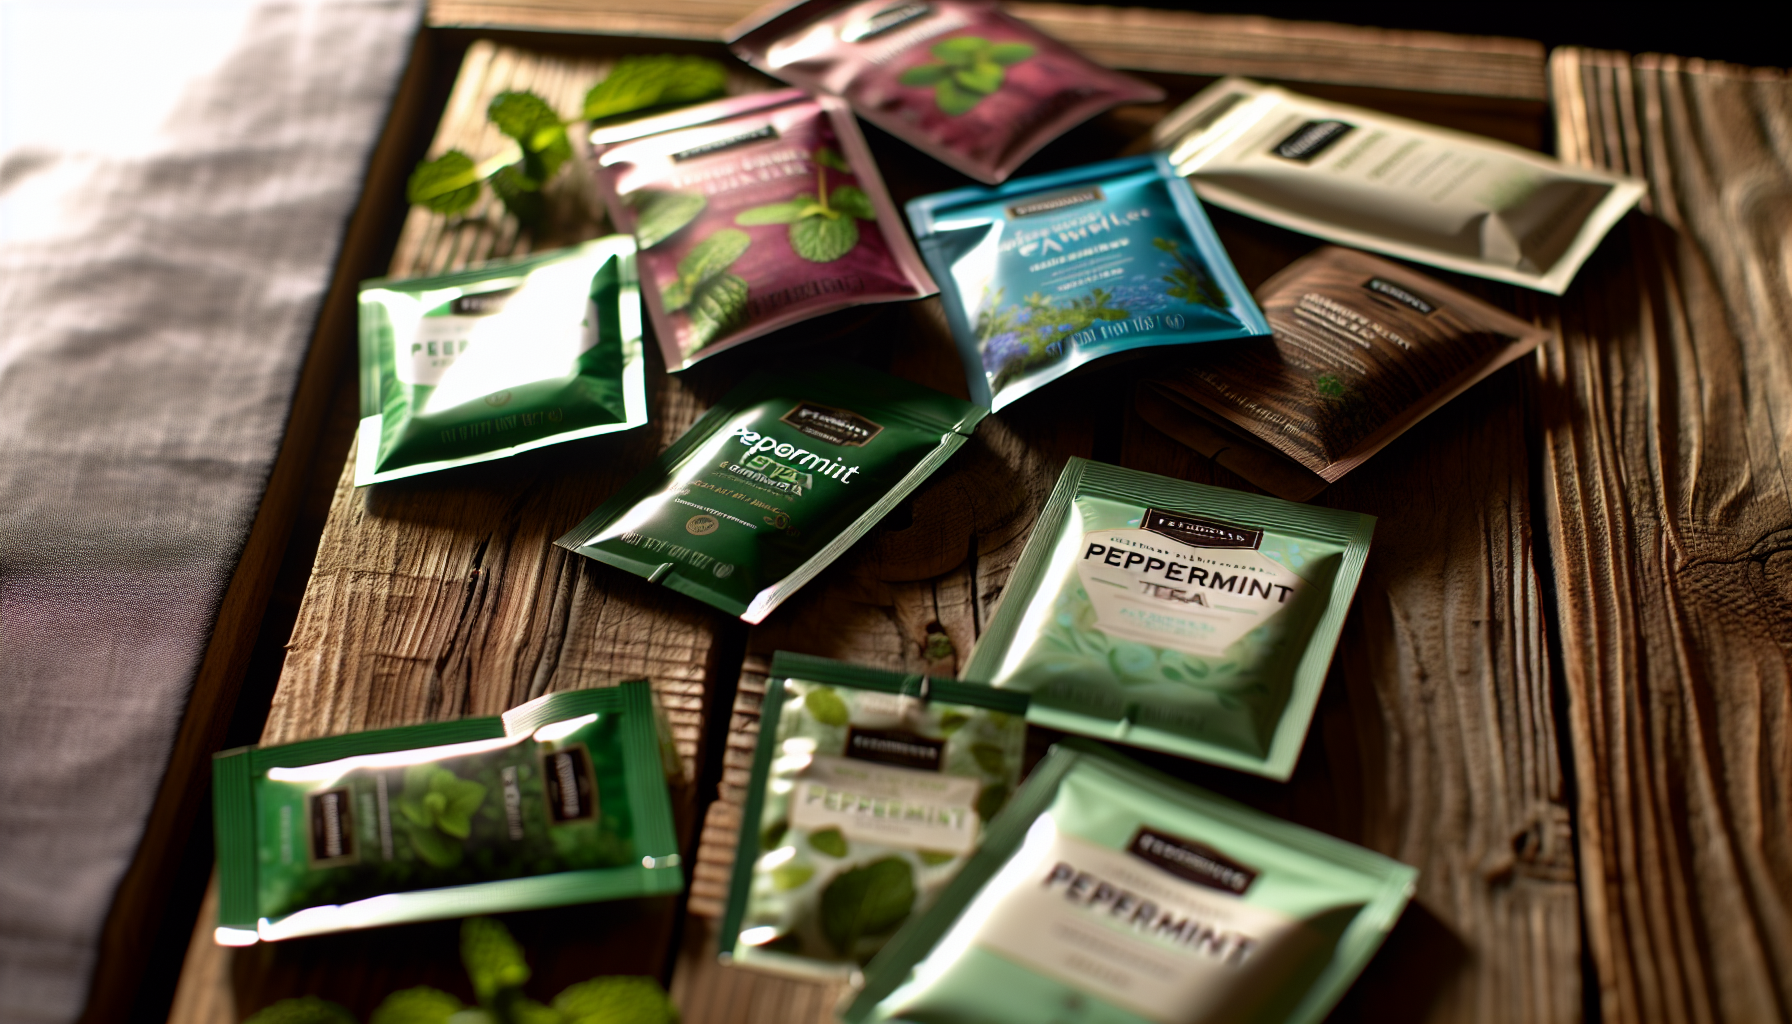 Variety of peppermint tea bags from top brands displayed on a wooden table